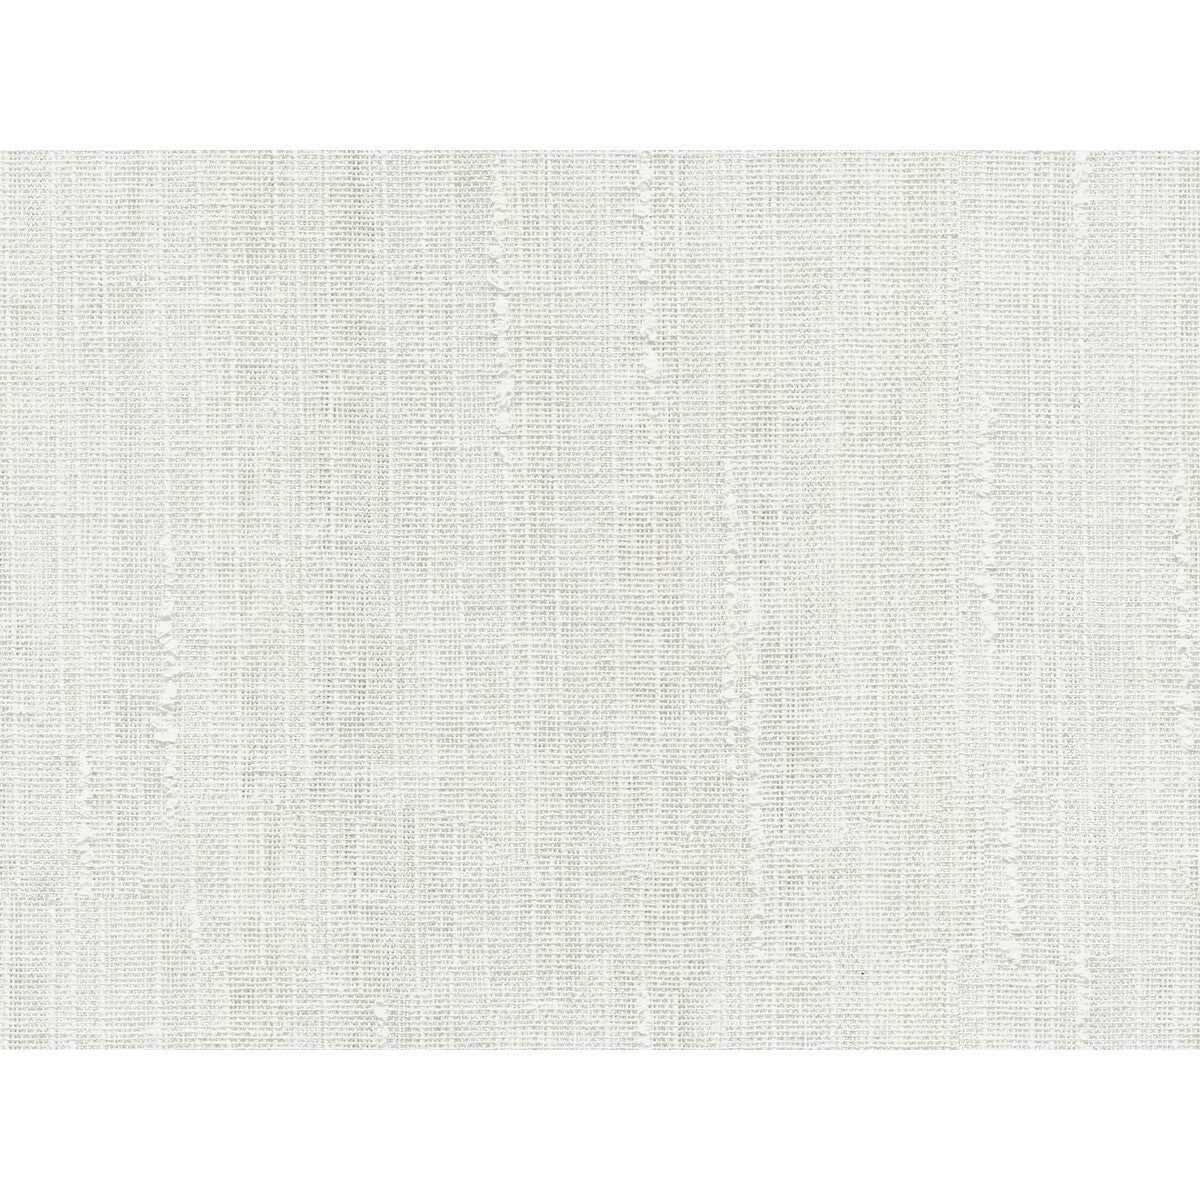 Kravet Contract fabric in 4535-1 color - pattern 4535.1.0 - by Kravet Contract